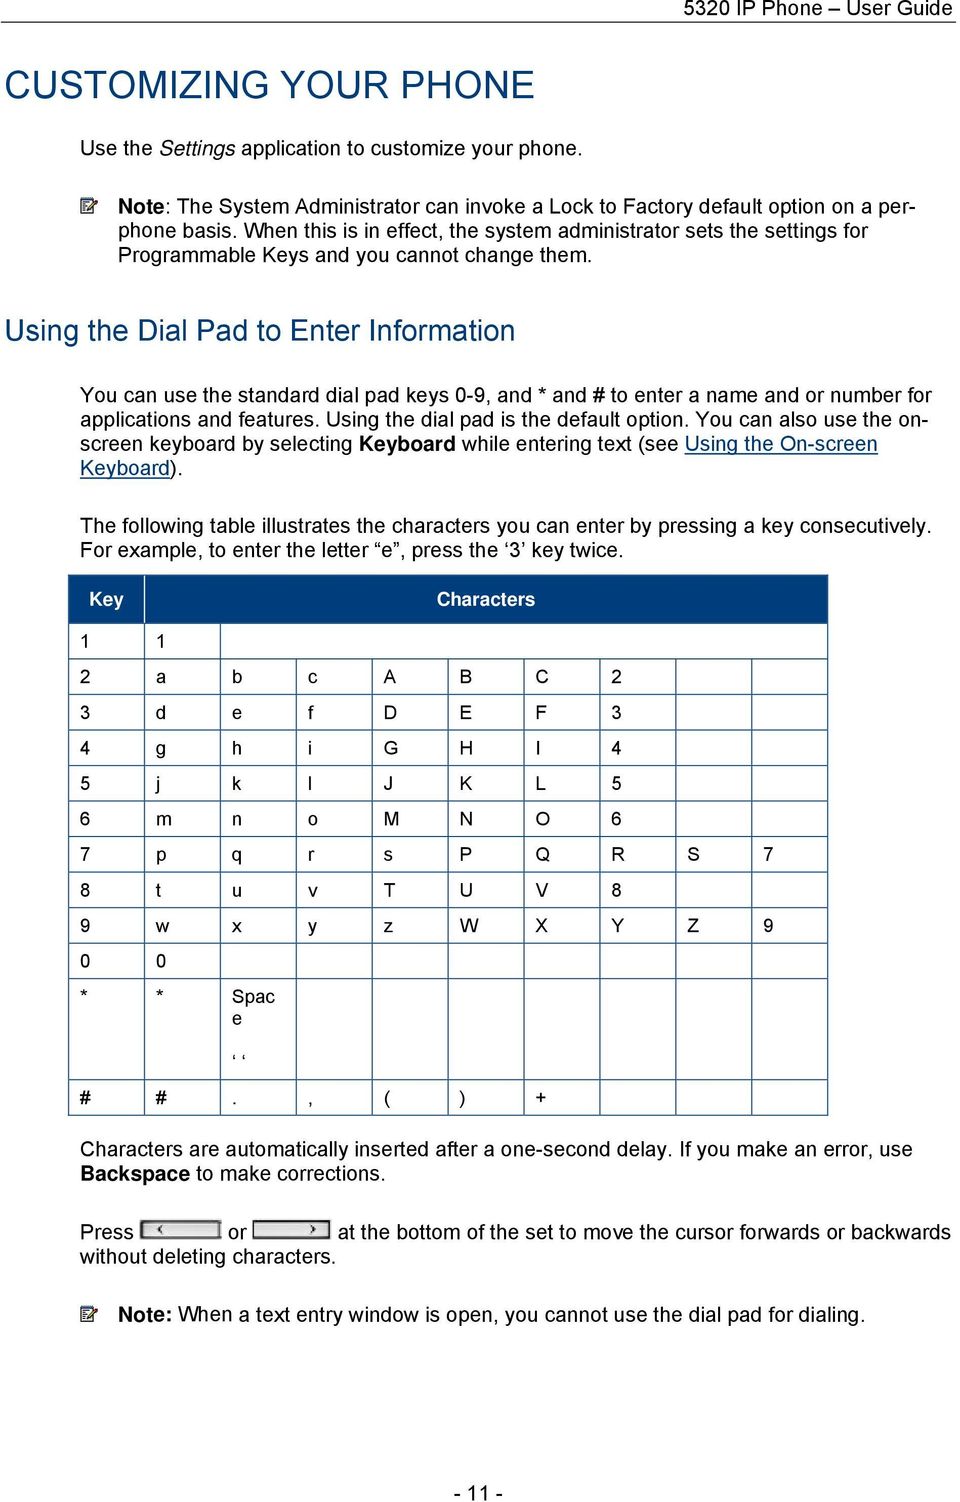 Using the Dial Pad to Enter Information You can use the standard dial pad keys 0-9, and * and # to enter a name and or number for applications and features. Using the dial pad is the default option.